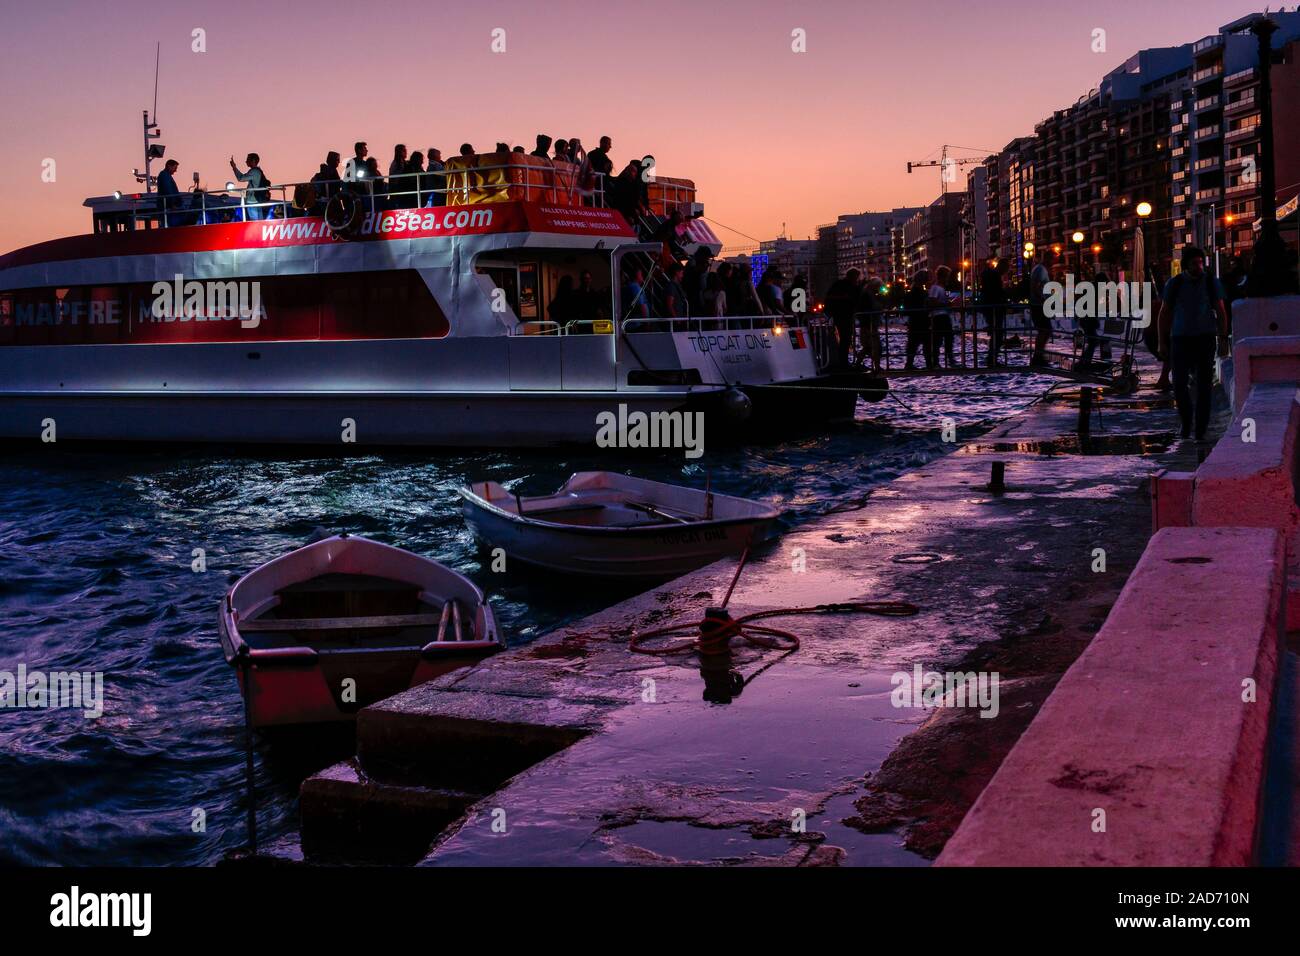 The Topcat One Valletta water taxi disembarkation as it's visitors arrive in Sliema, Malta at sunset. Stock Photo